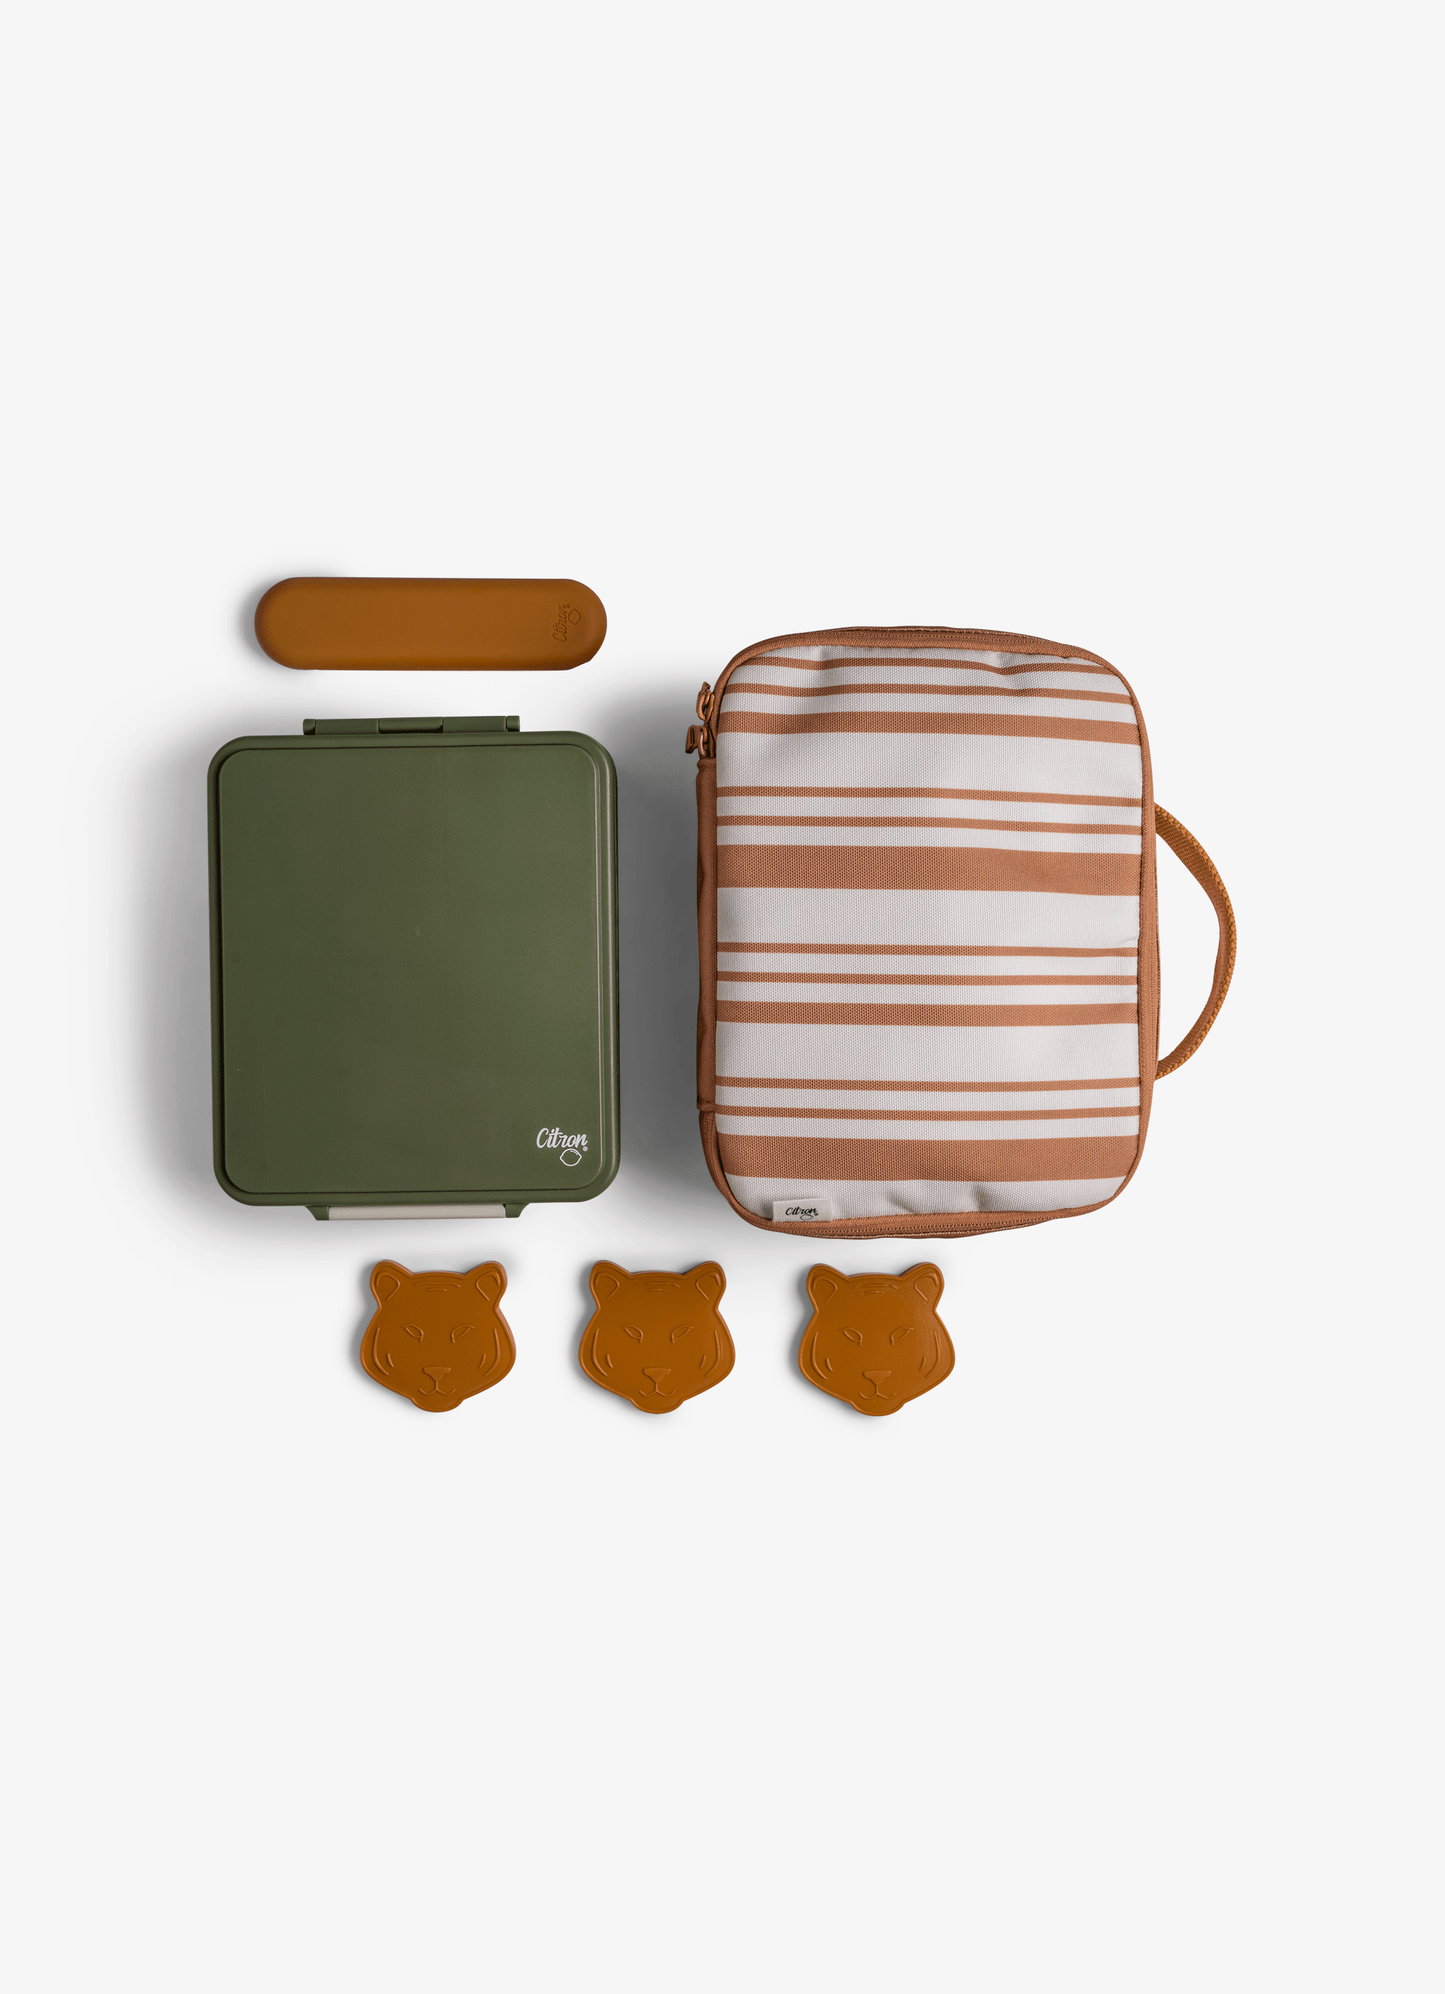 Insulated Square Lunch bag - Caramel